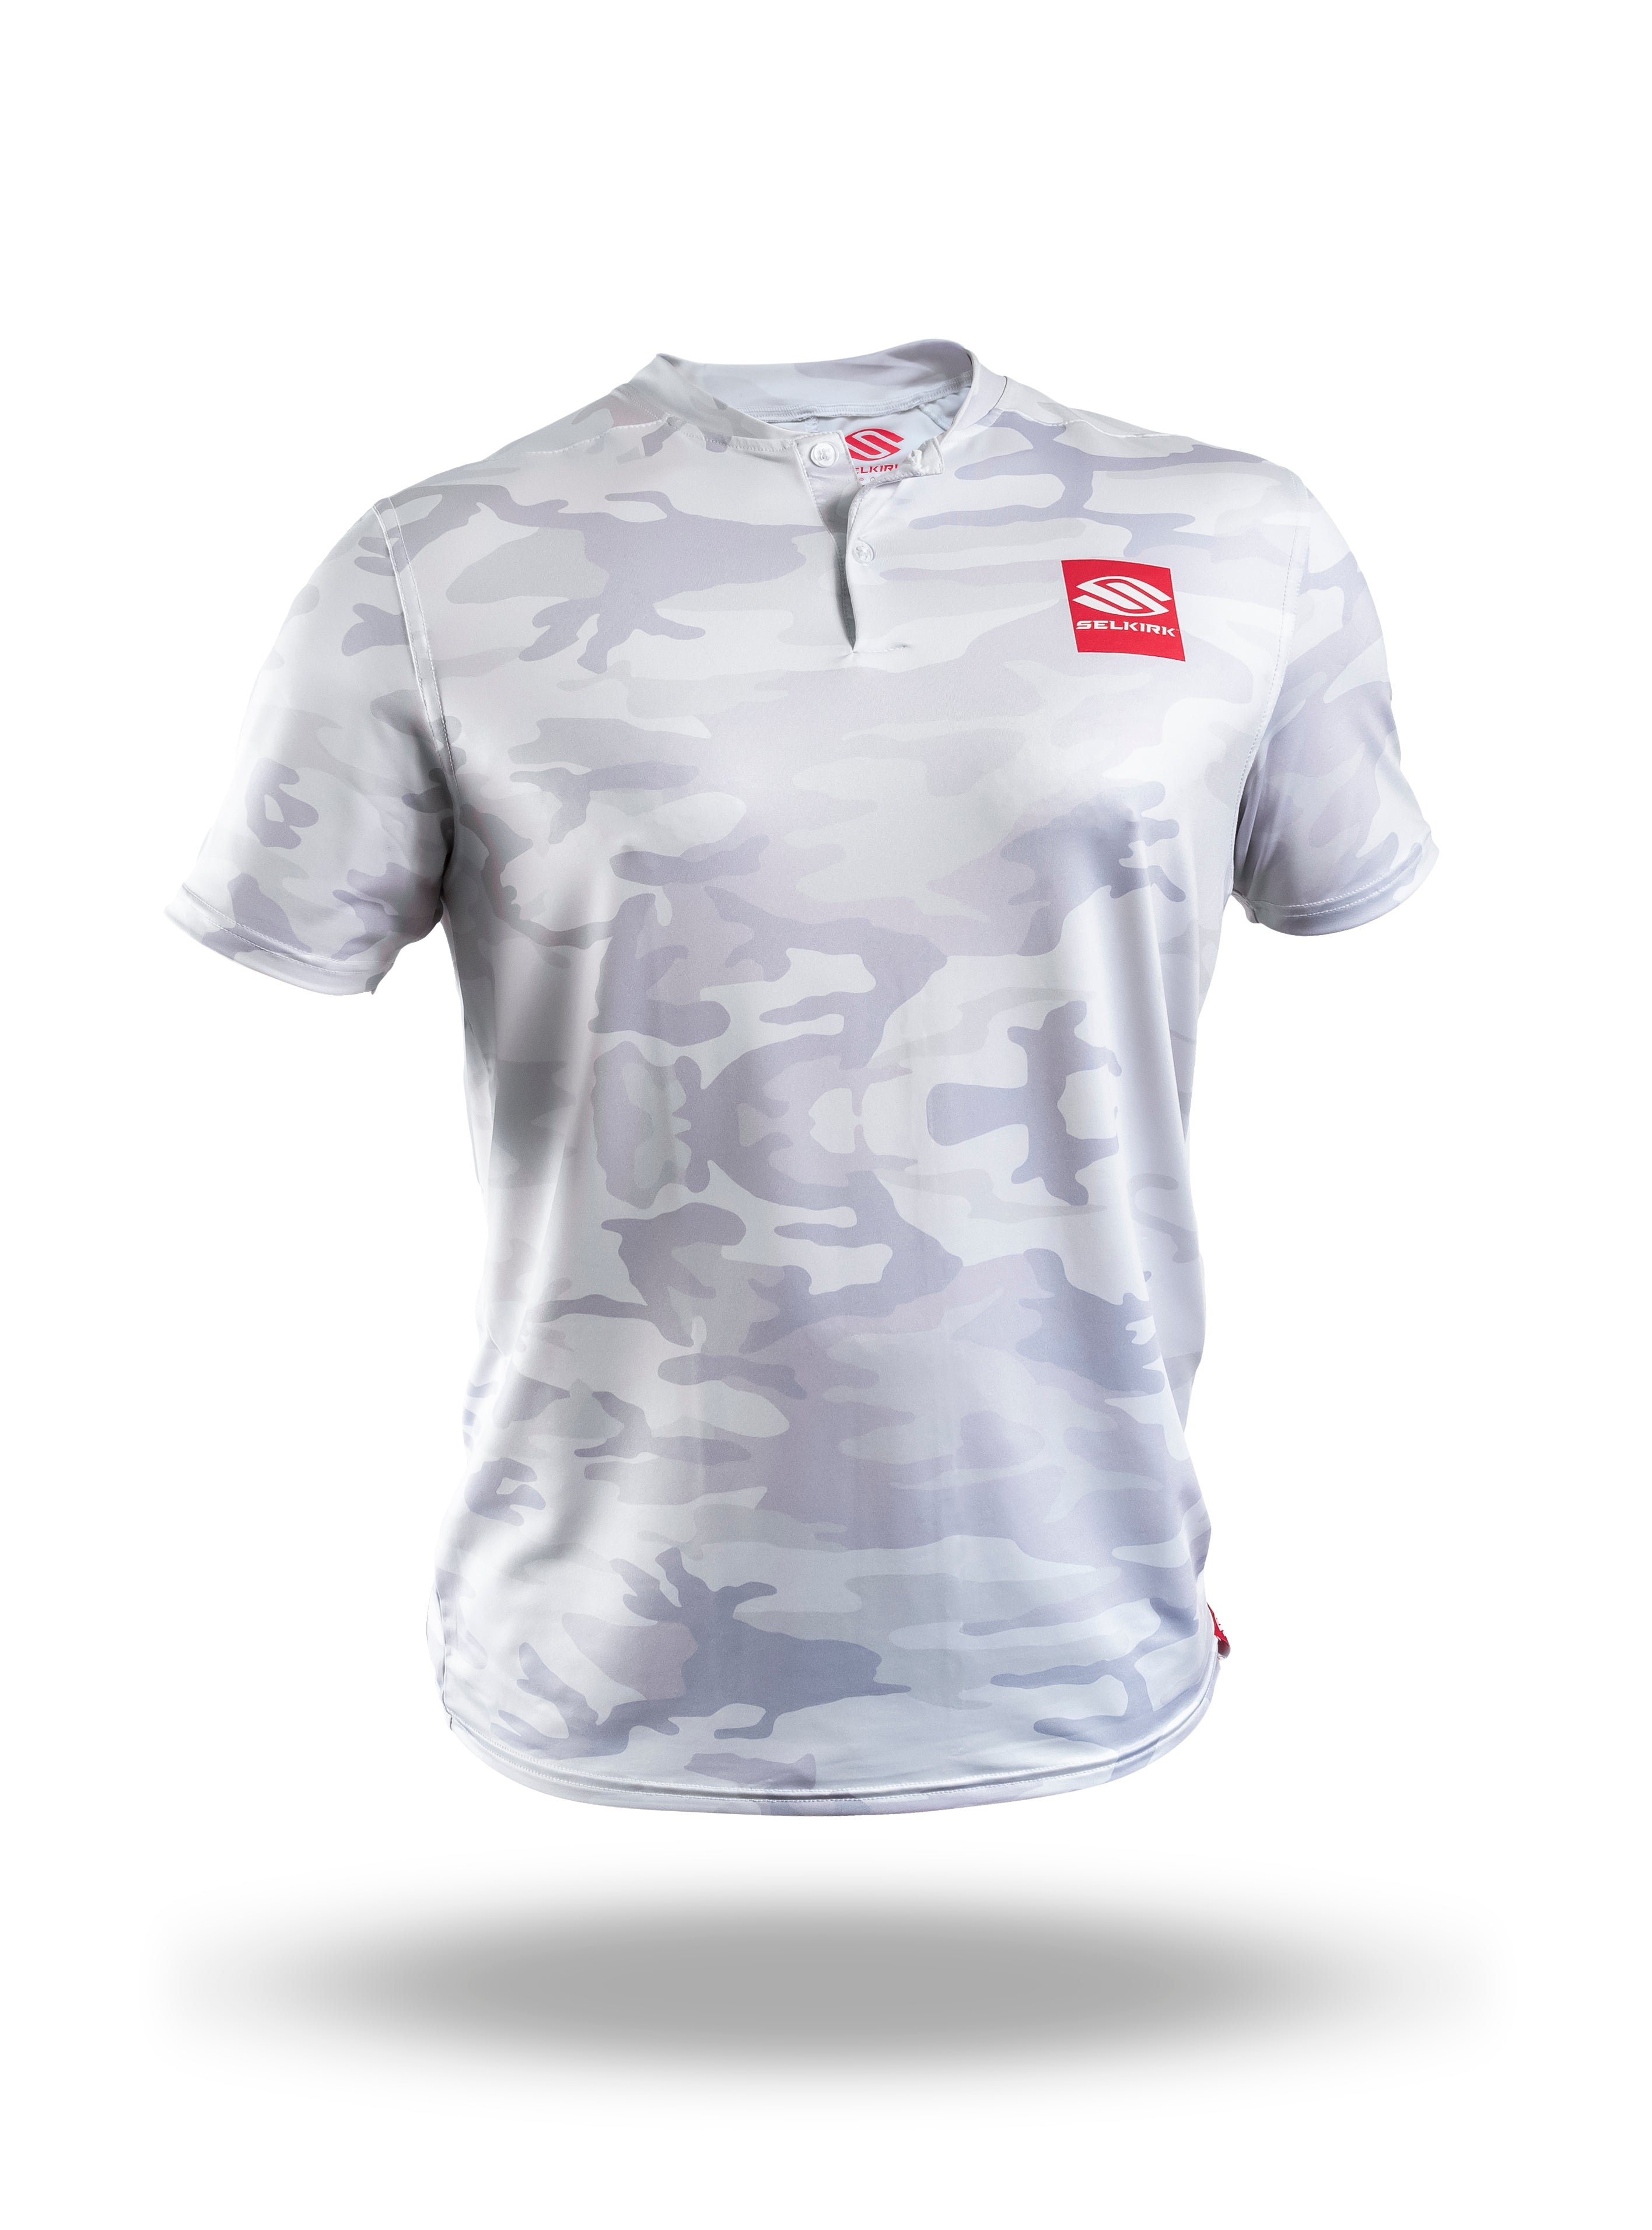 White Selkirk Red Label Men's Velocity Polo - Camo - Stretch-Wik Technology